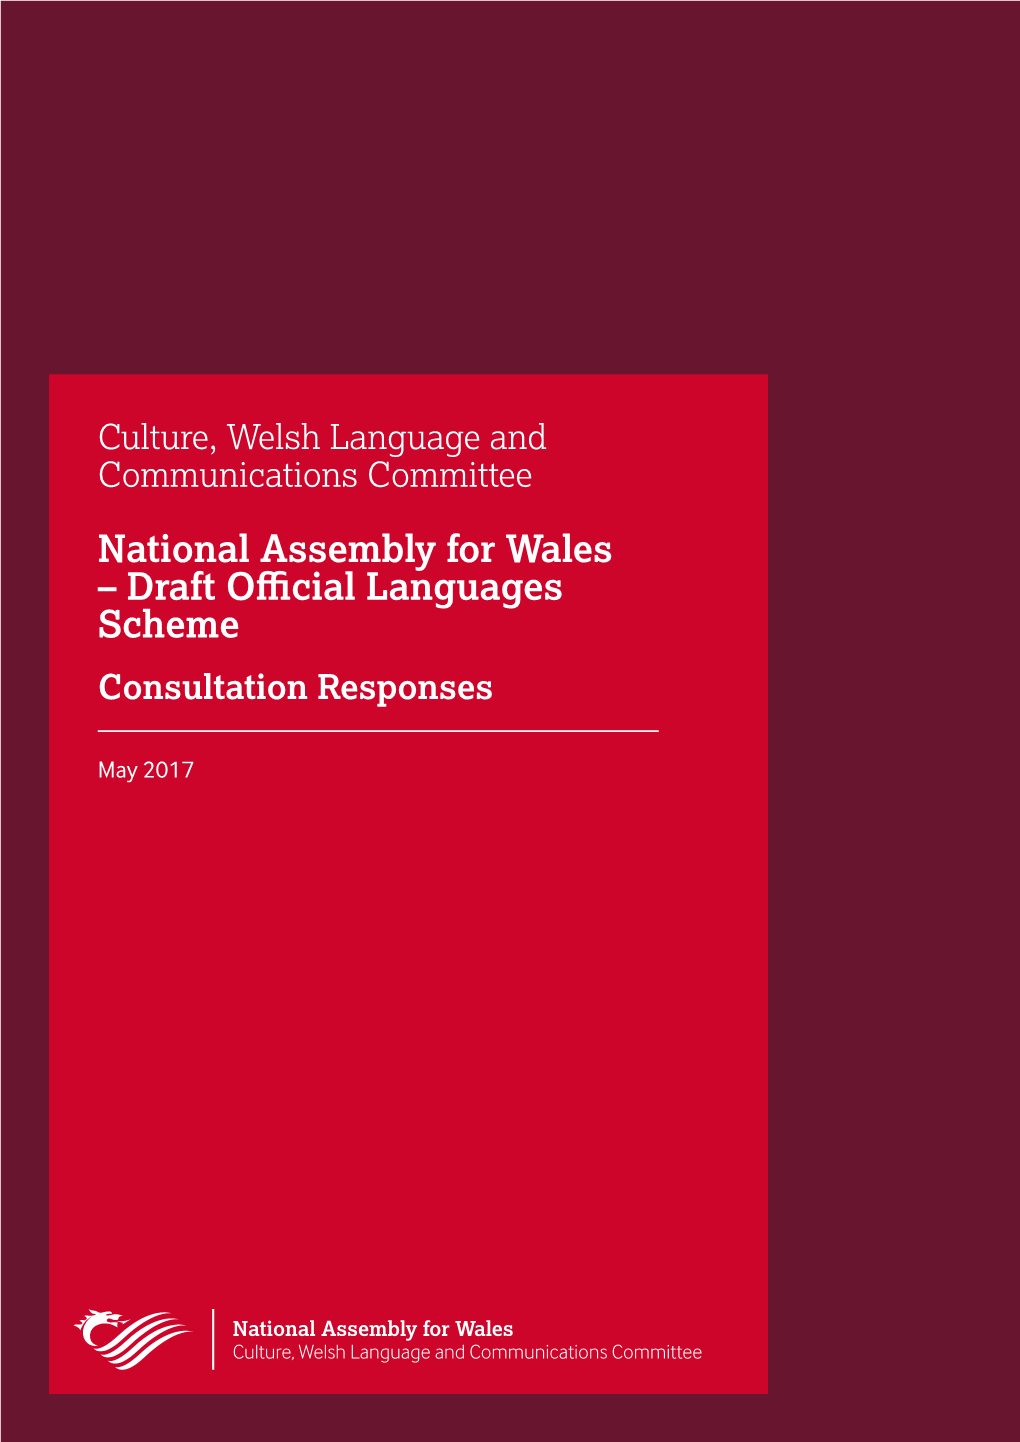 National Assembly for Wales – Draft Official Languages Scheme Consultation Responses